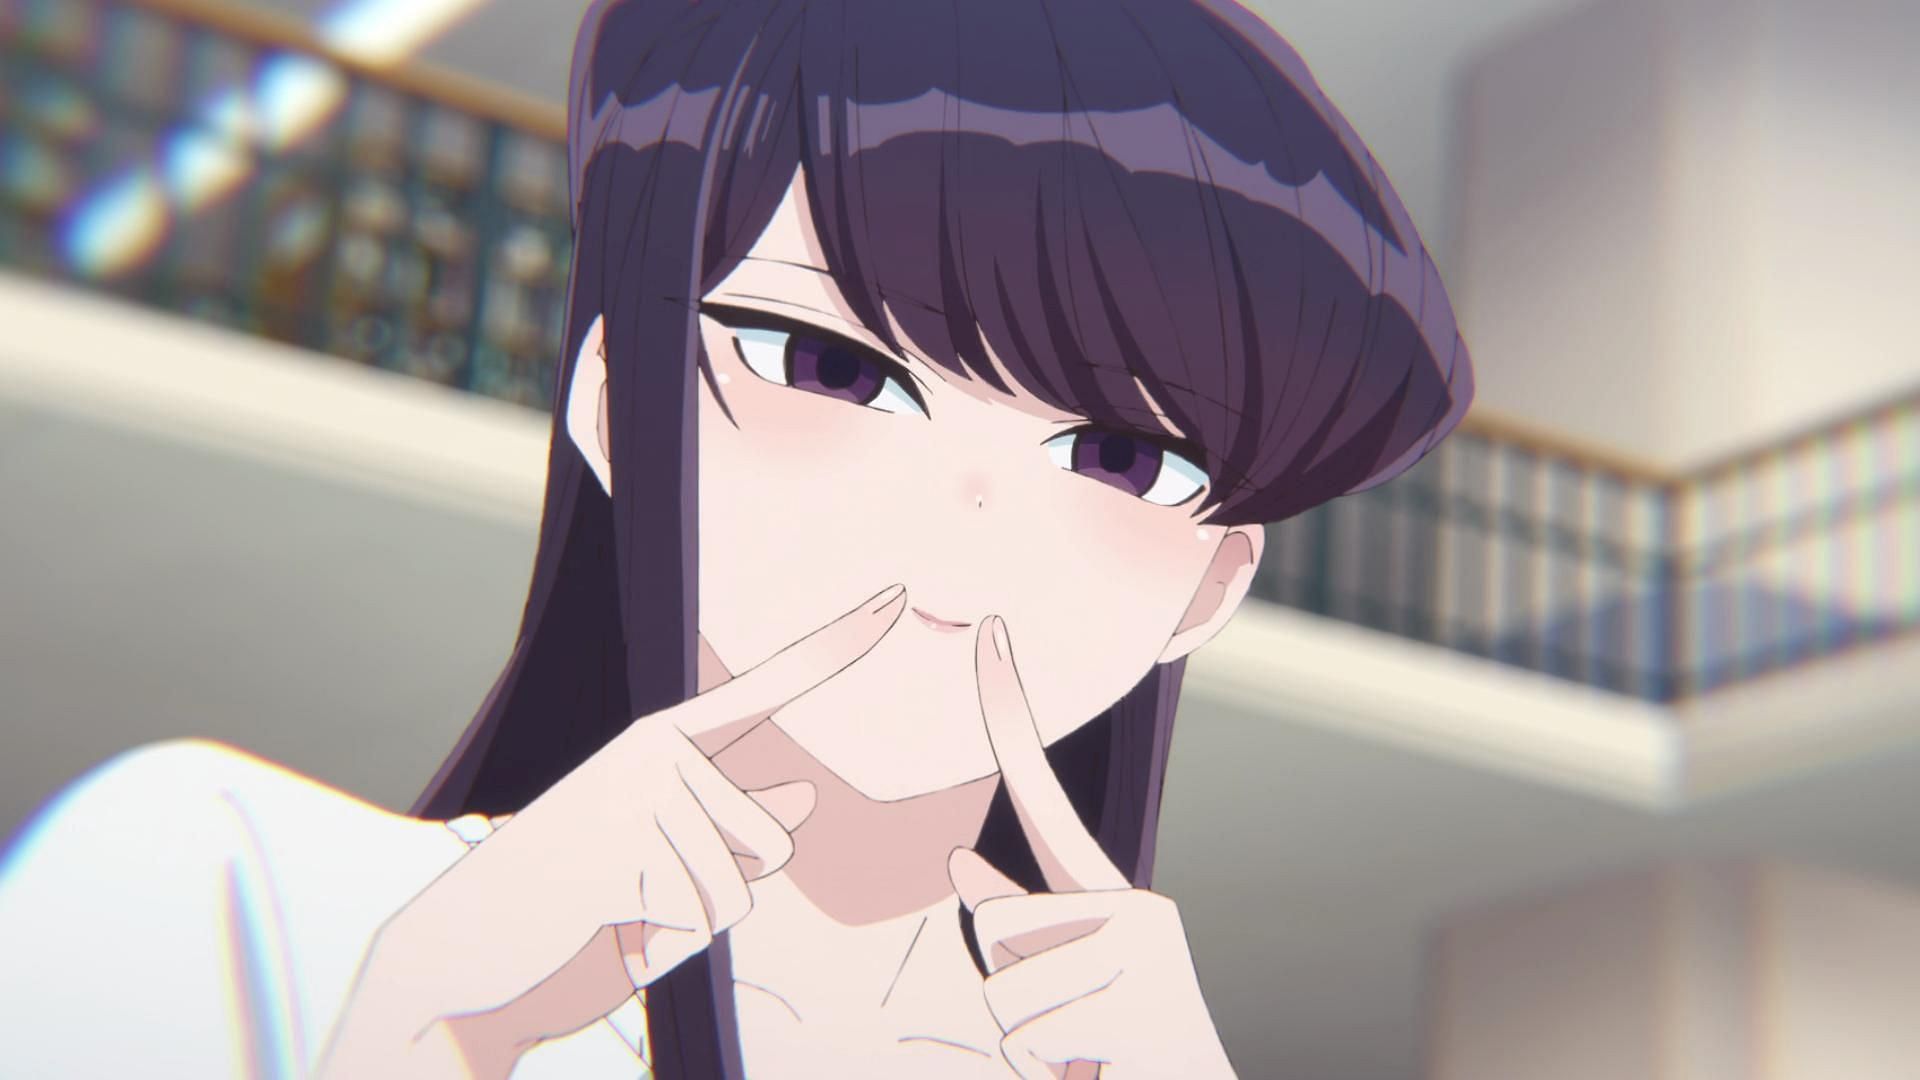 A rare moment when Komi tries to communicate on her own (Image via OLM)